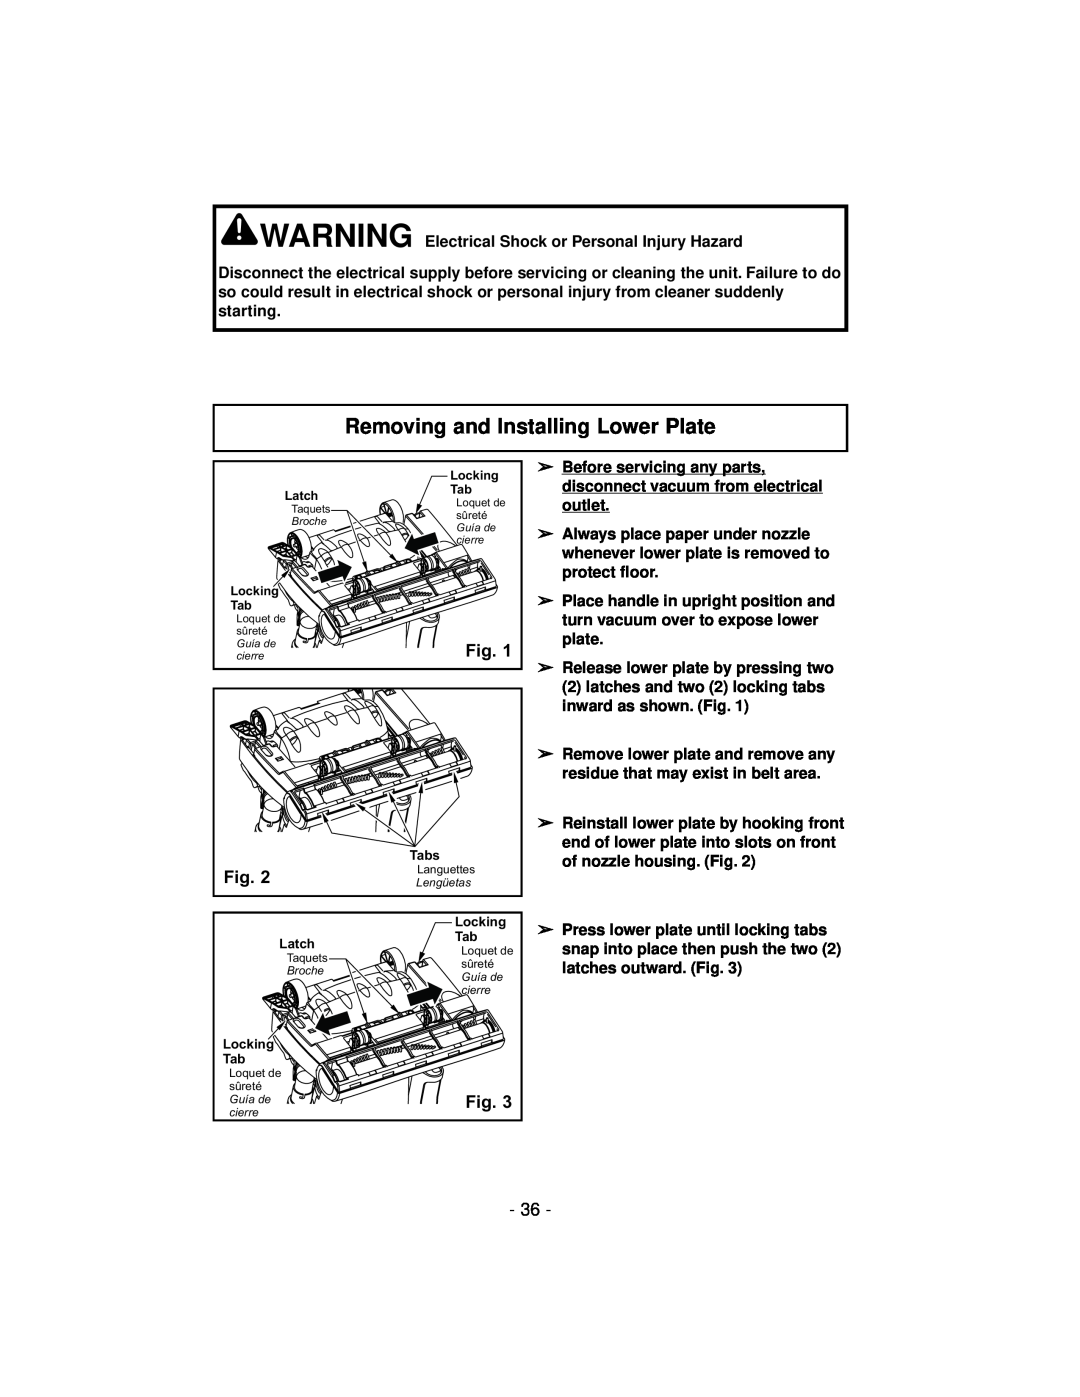 Panasonic MC-V7600 operating instructions Removing and Installing Lower Plate 